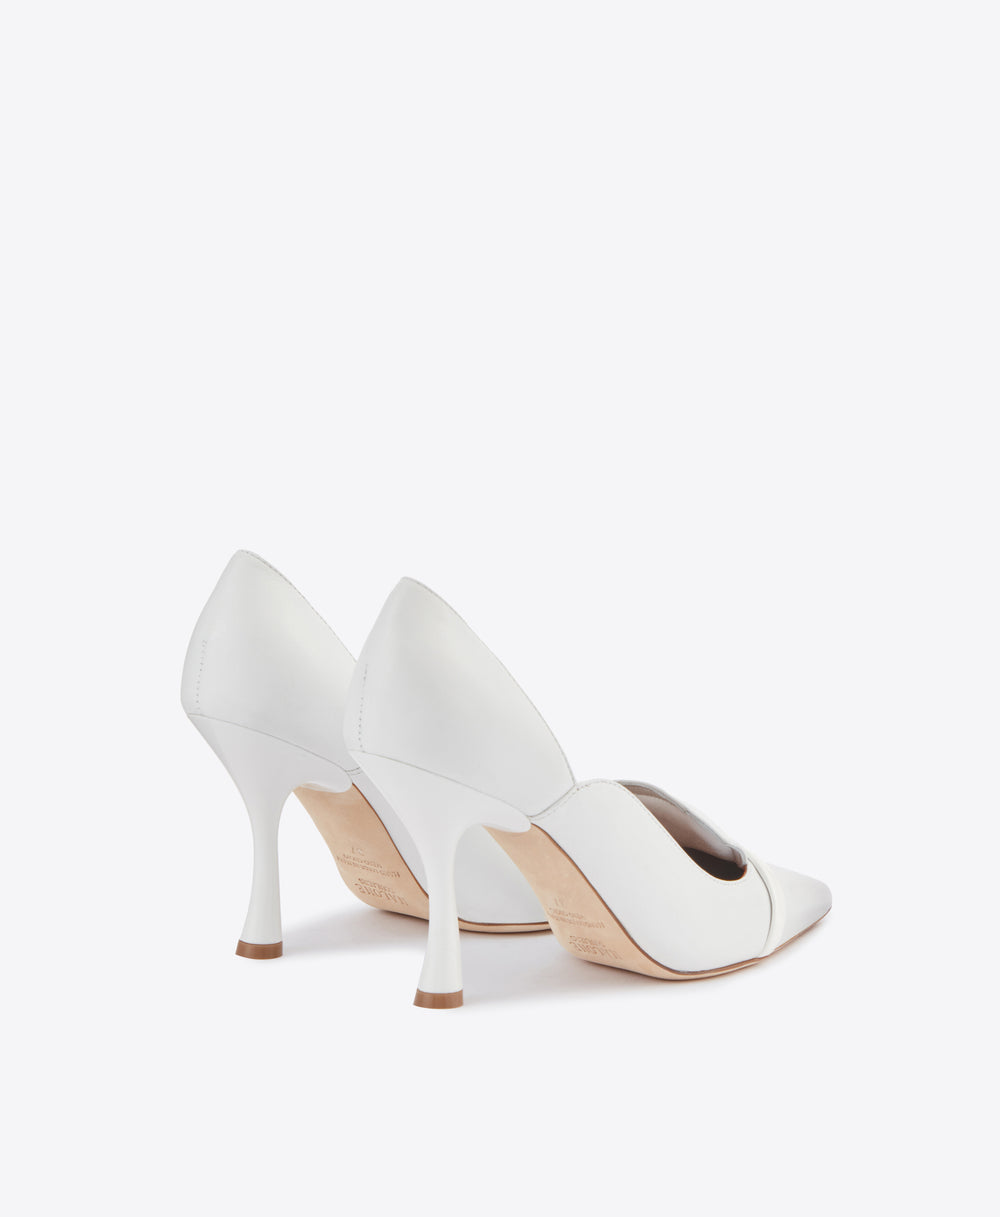 Women's White Leather Heeled Pumps Malone Souliers